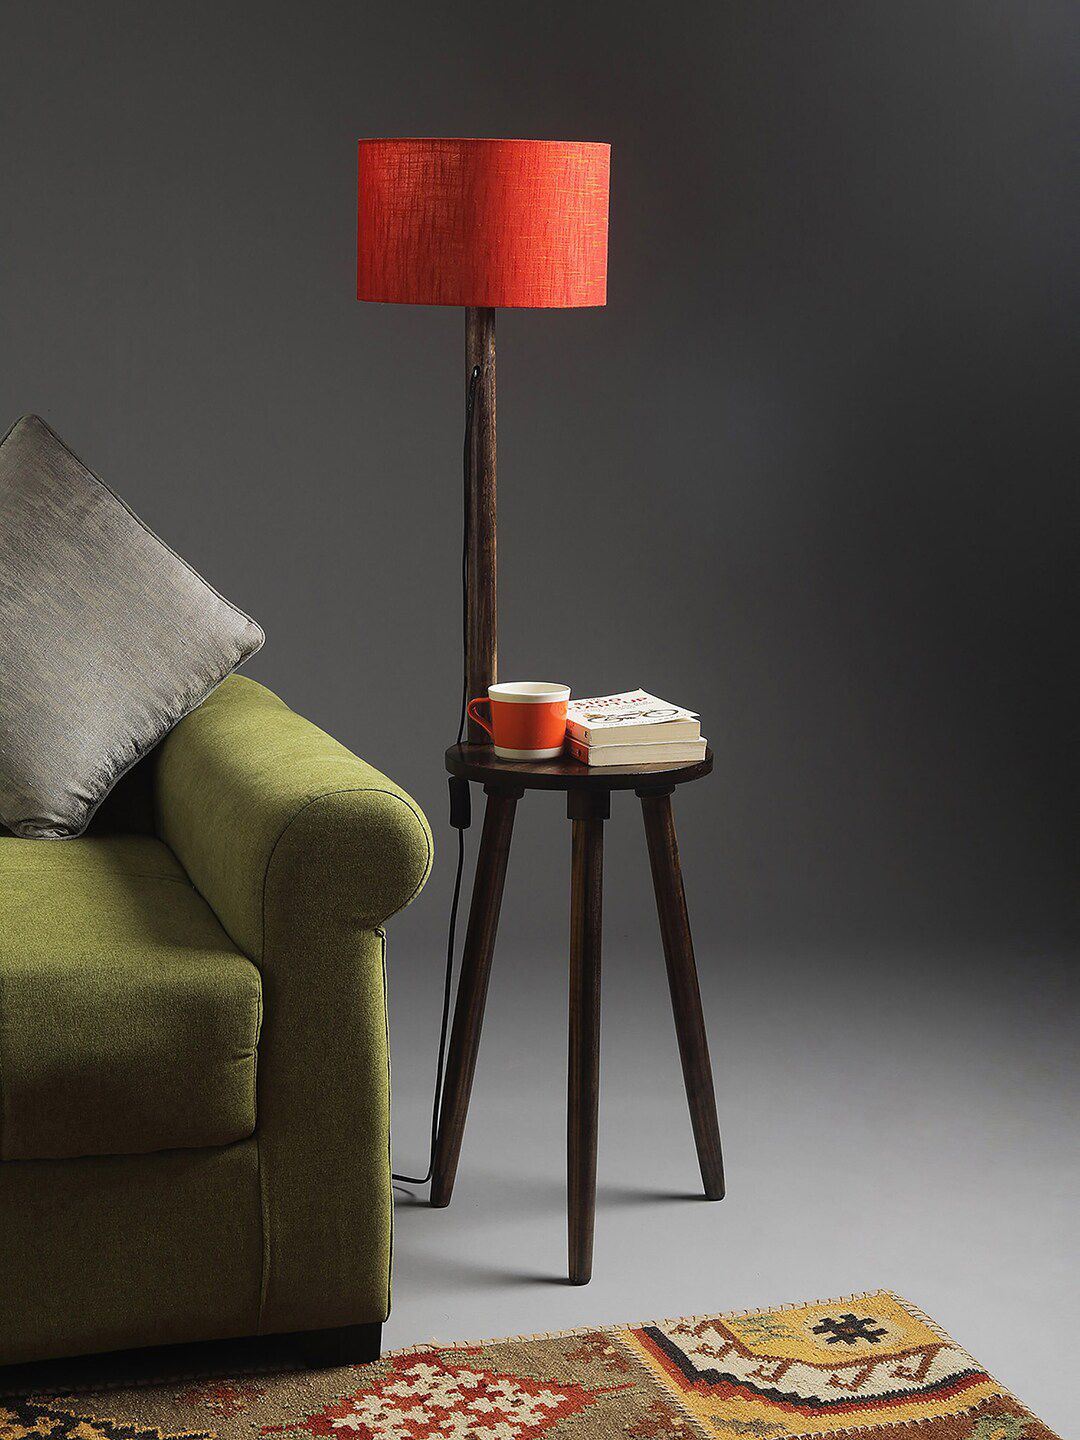 SANDED EDGE Yash Solid Wood Red Cotton Shade Floor Lamp Price in India